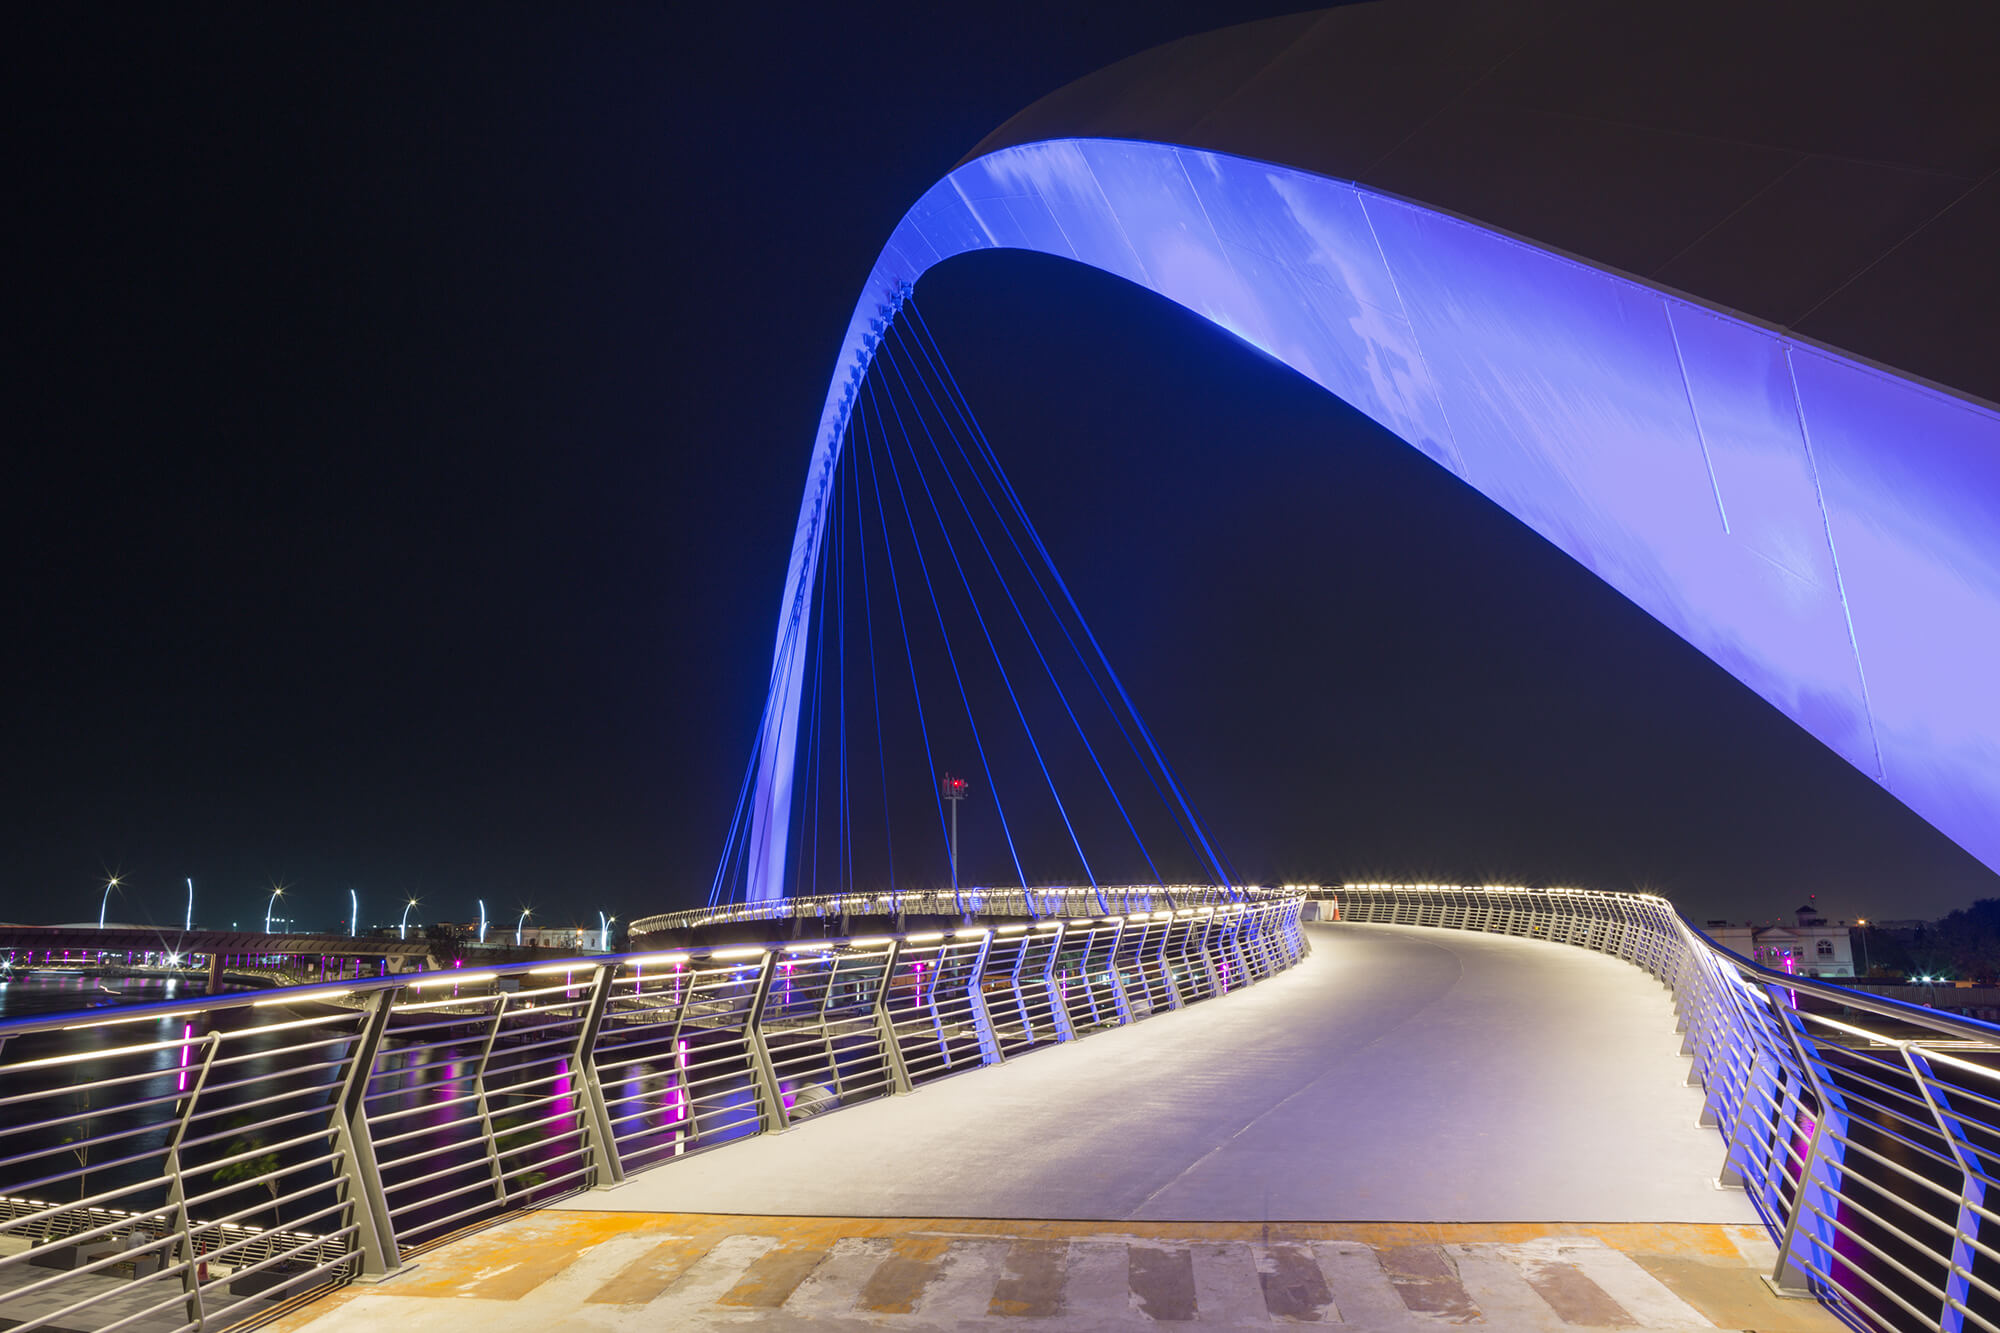 A photograph of a modern bridge spanning over water. The bridge features sleek lines and architectural details, reflecting contemporary bridge design. The image conveys the concept of modern infrastructure and architectural engineering in bridge construction.